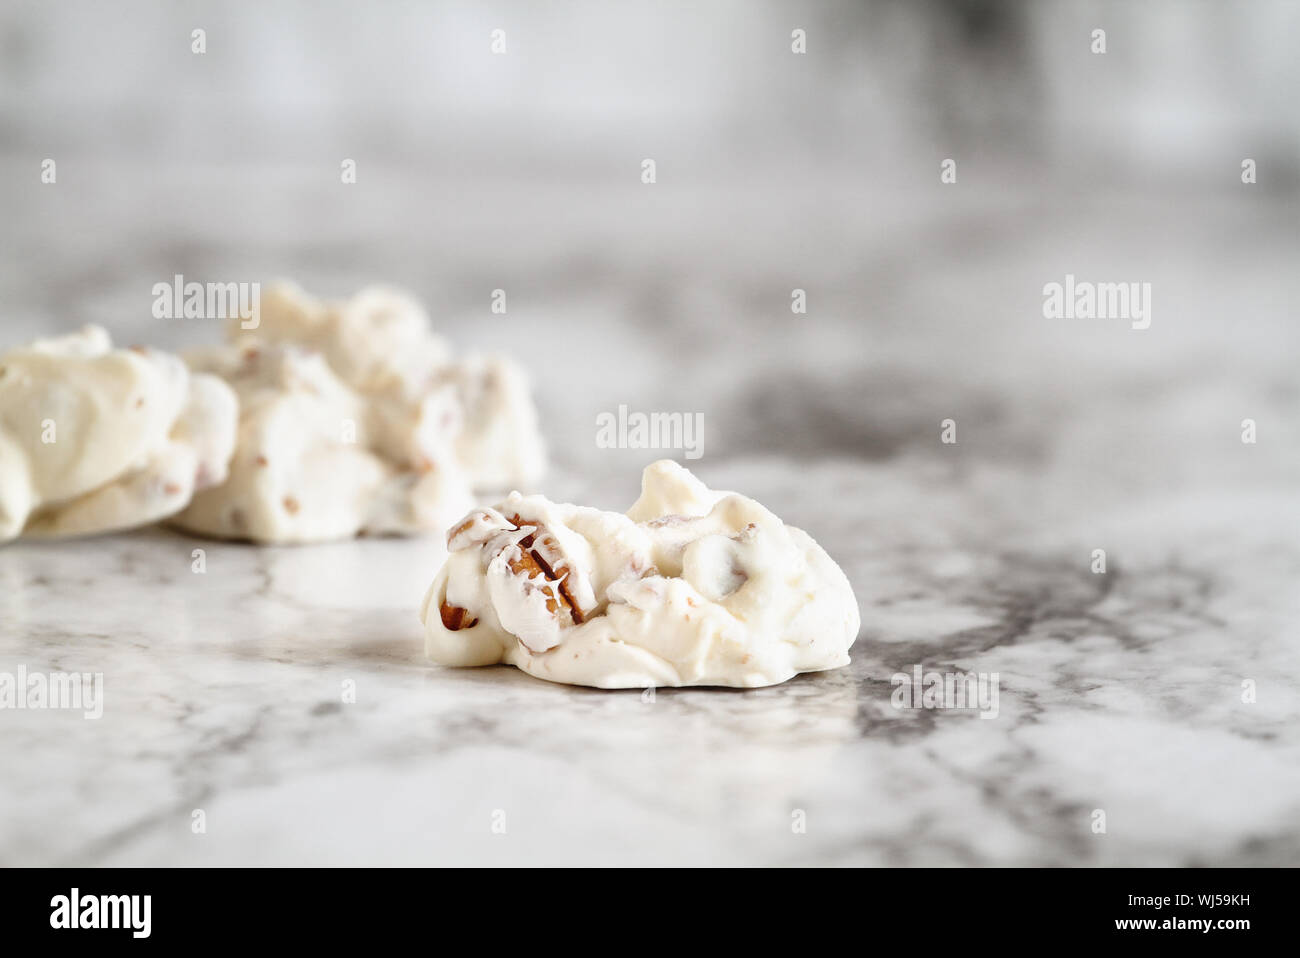 Keto butter pecan fat bombs. Made with pecan nuts, coconut oil and butter. .Selective focus with blurred background. Ketogenic diet concept Stock Photo